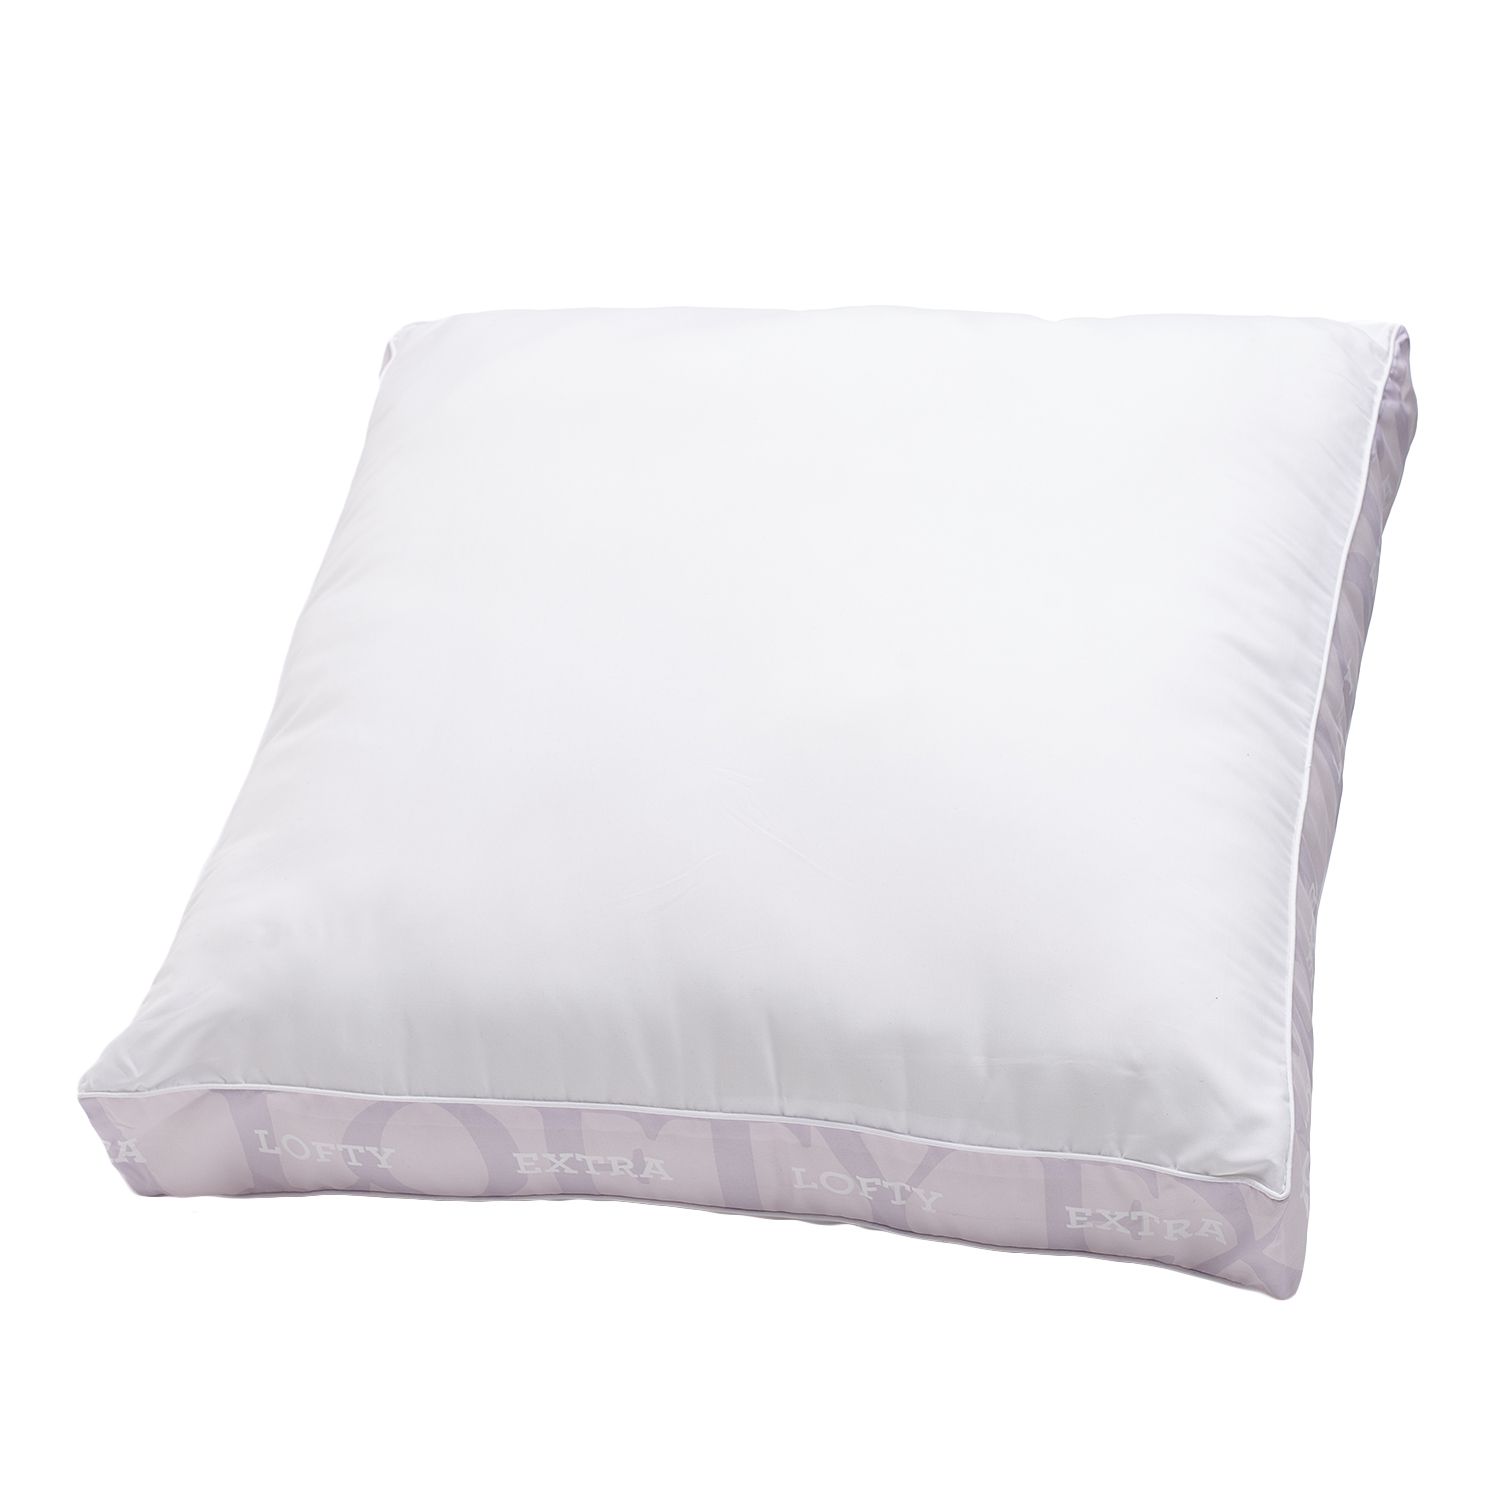 Won't Go Flat Extra Firm Euro Square Pillow